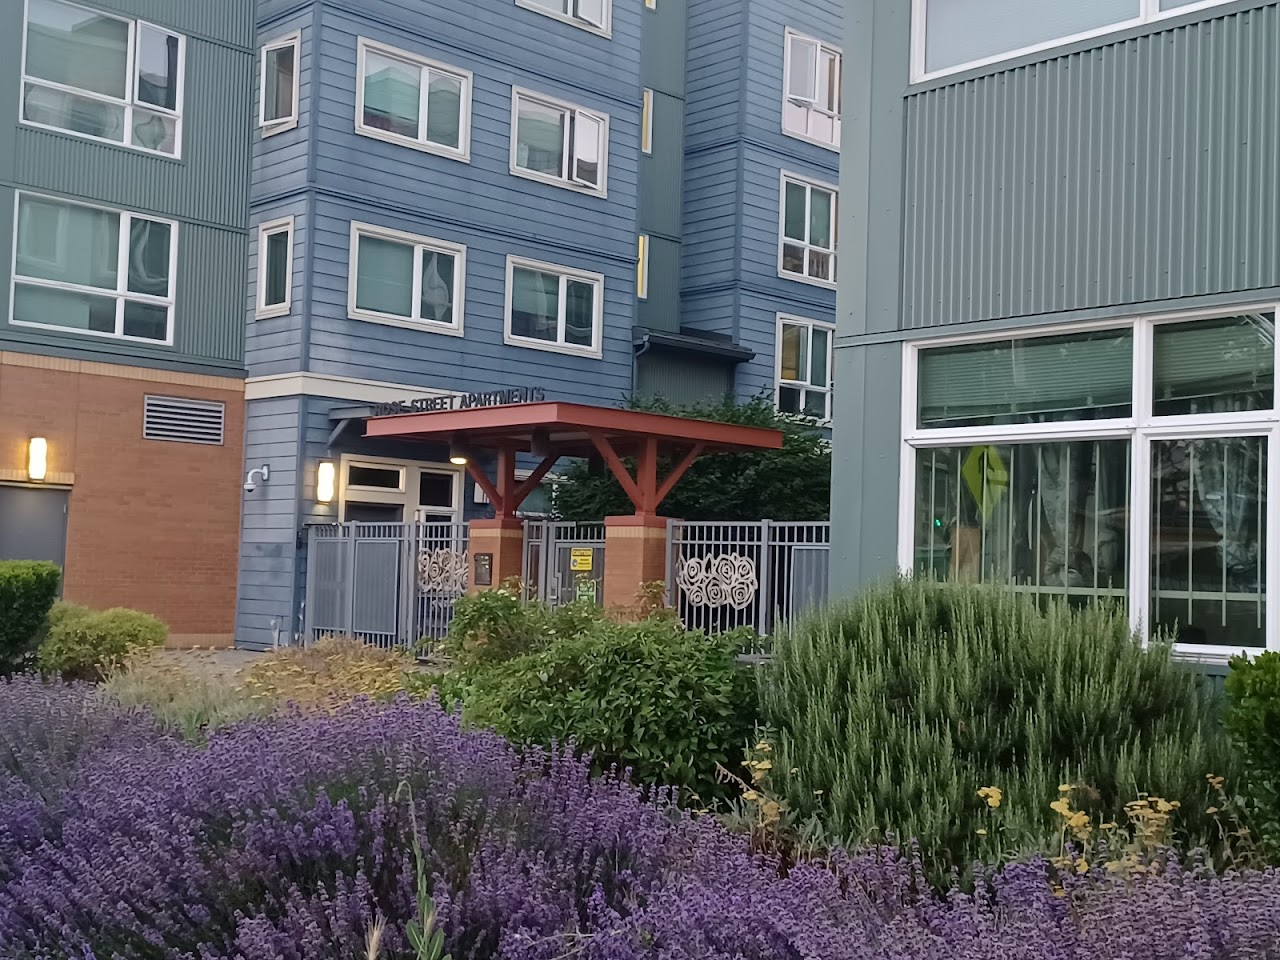 Photo of ROSE STREET APARTMENTS. Affordable housing located at 8124 RAINIER AVE SOUTH SEATTLE, WA 98118